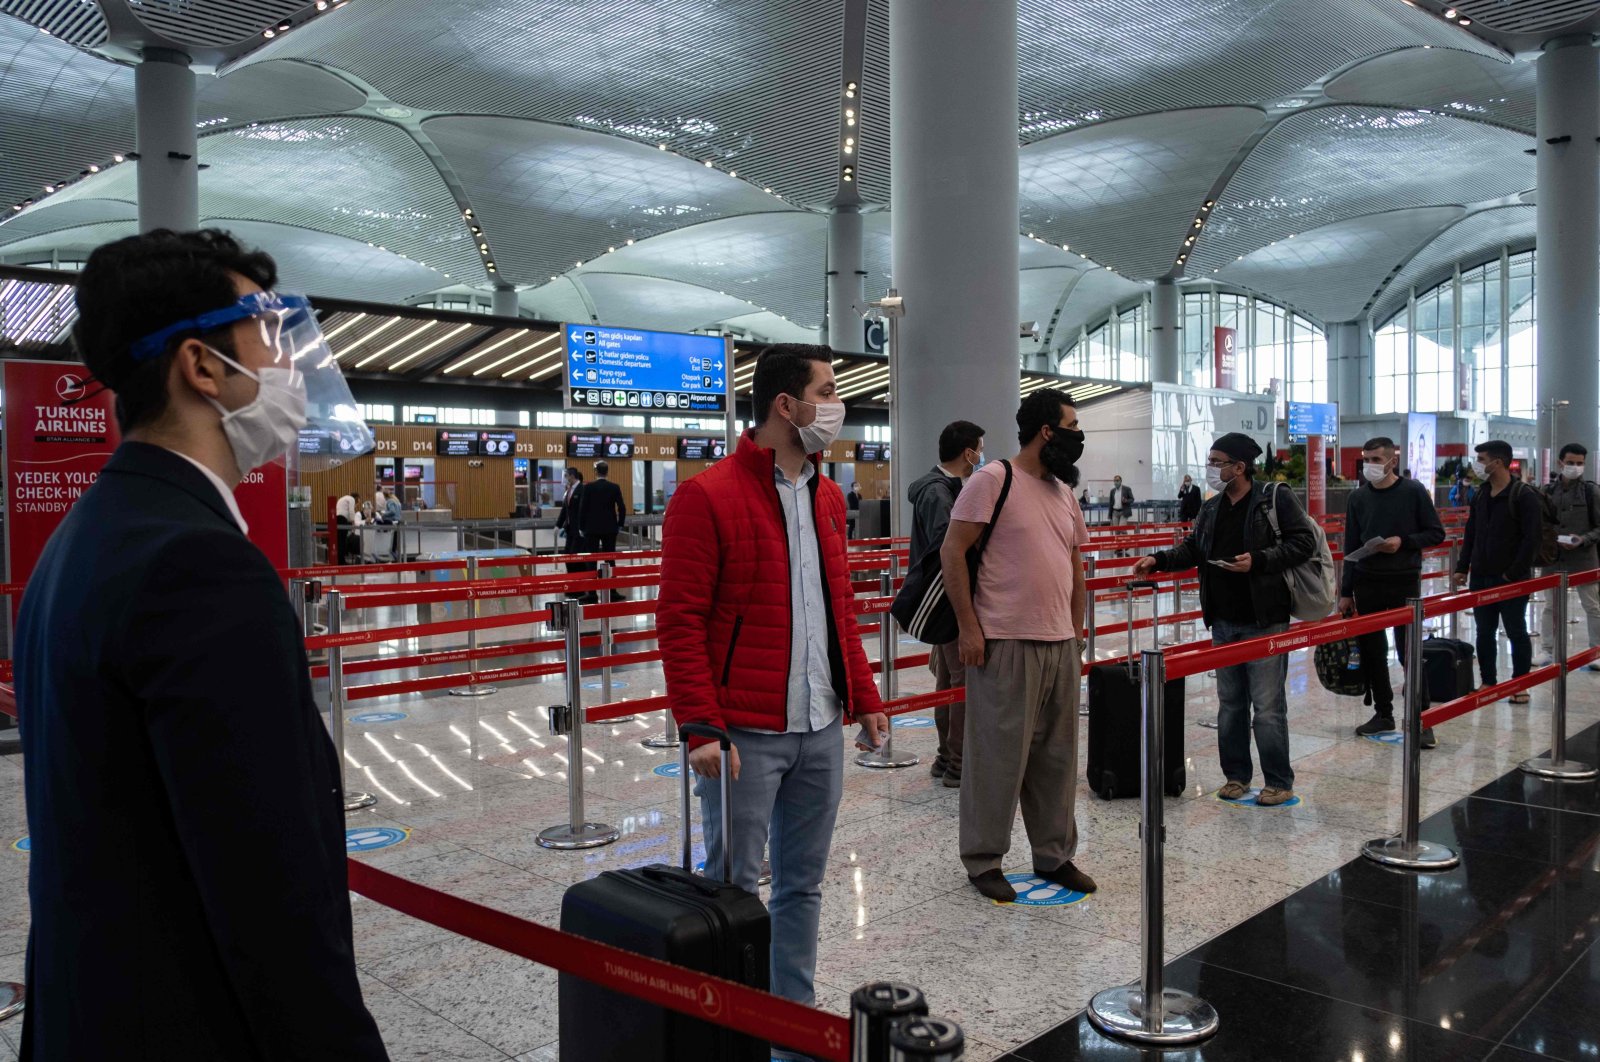 Passengers wearing protective face masks wait to be checked in at Istanbul Airport on the first day of the resumption of domestic flights after a pause due to the pandemic, in Istanbul, Turkey, June 1, 2020. (AFP Photo)